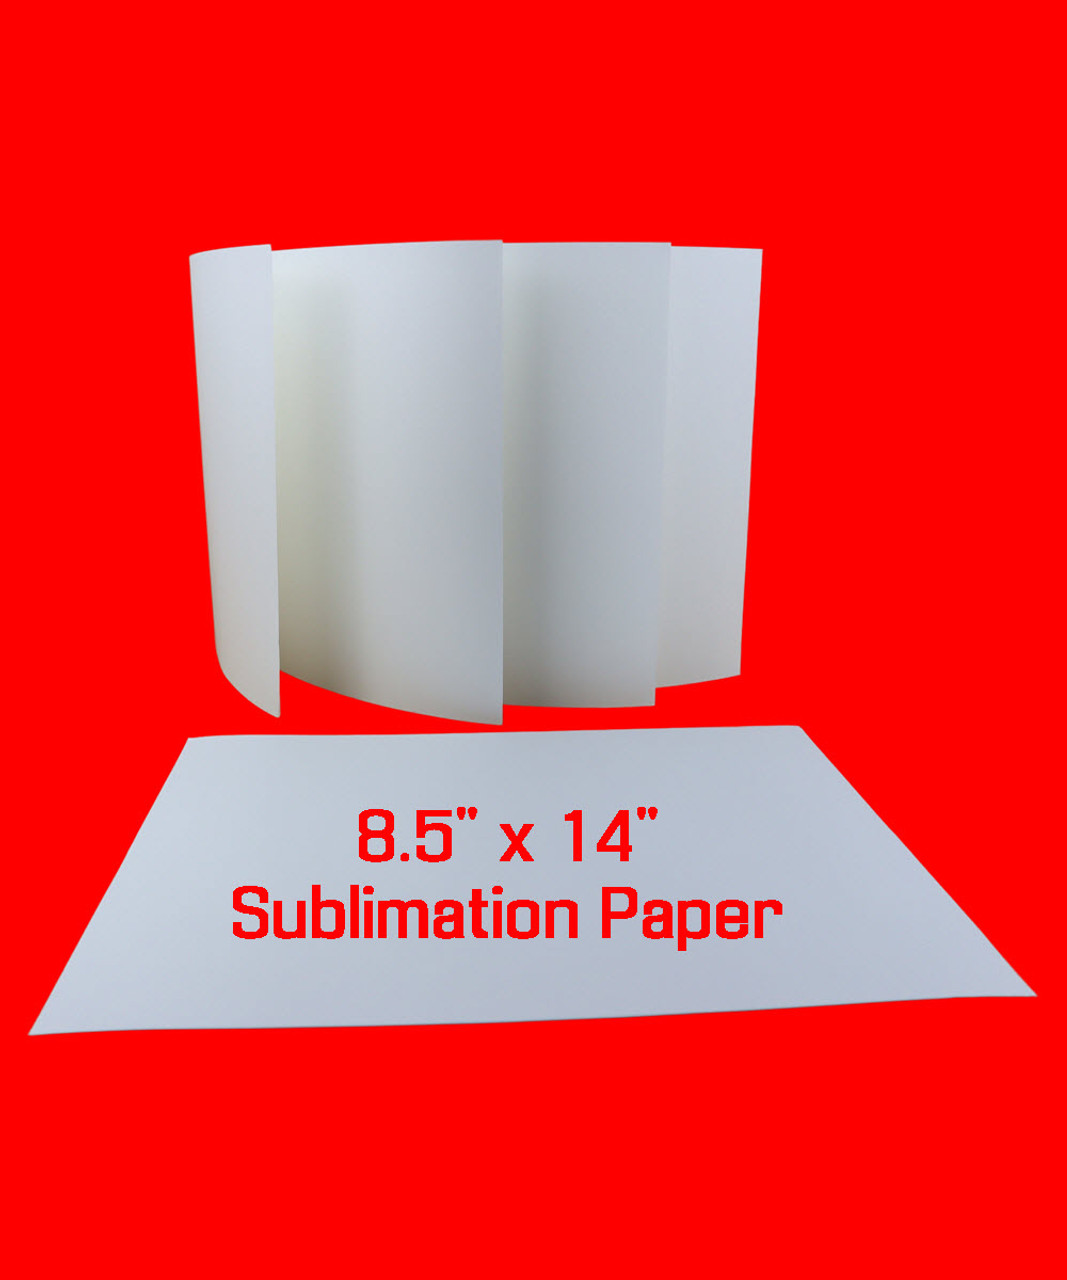 8.5 x 14 inch Sublimation Paper Lay Flat NO CURL paper 120GSM 100 Sheet Package
